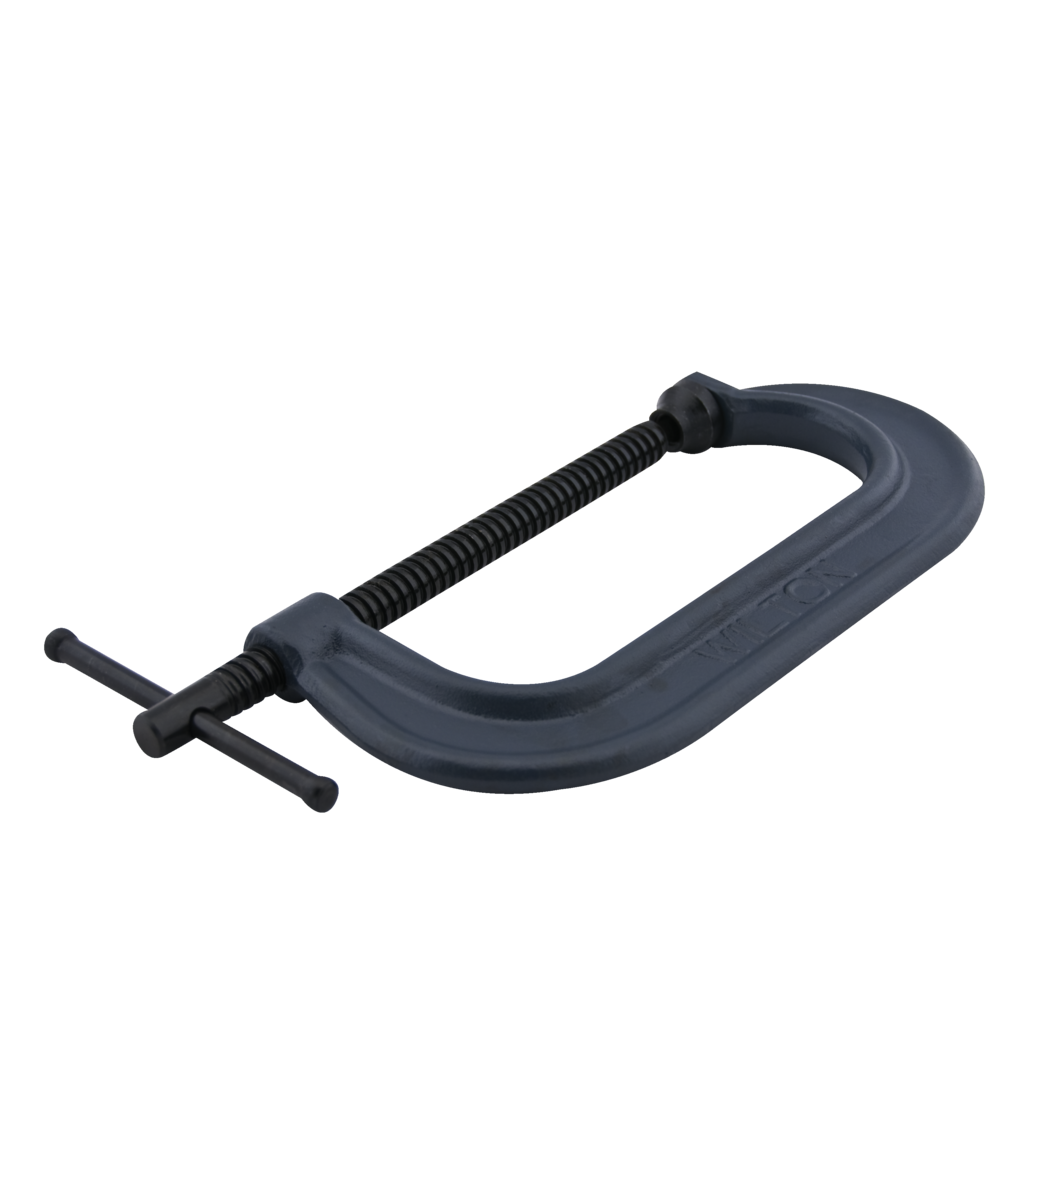 WILTON 800 Series Standard Depth Drop Forged C-Clamp, 0 -2” Opening, 1-13/16” Throat